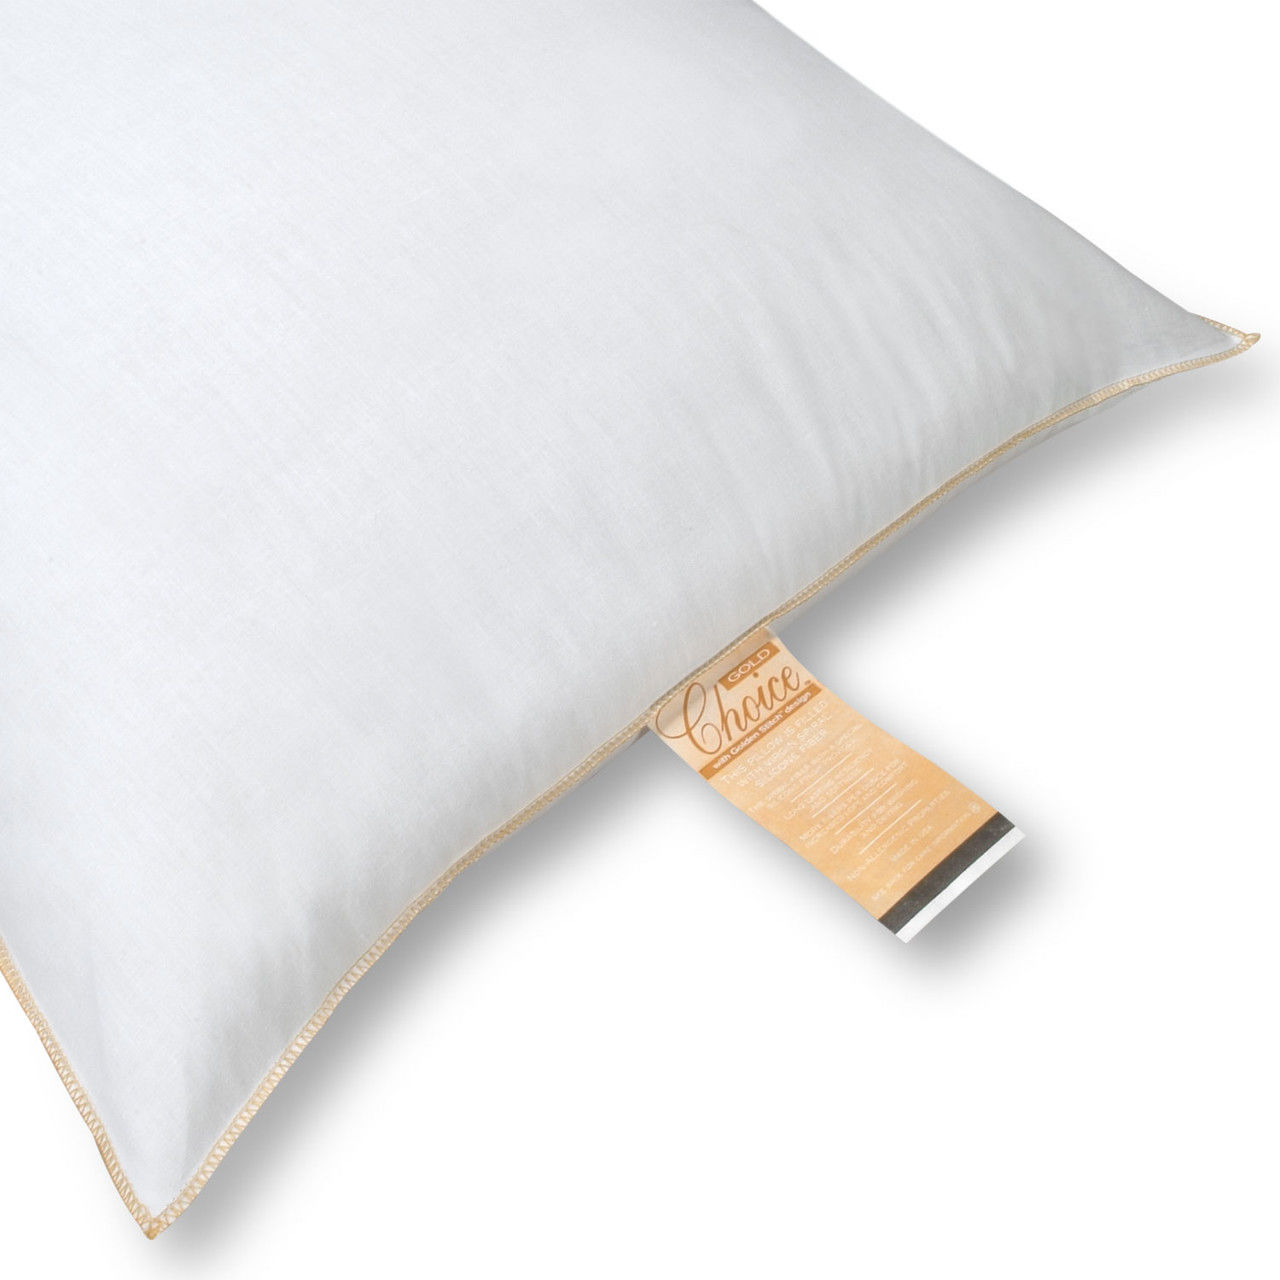 What experiences are possible with Gold Choice Pillows?